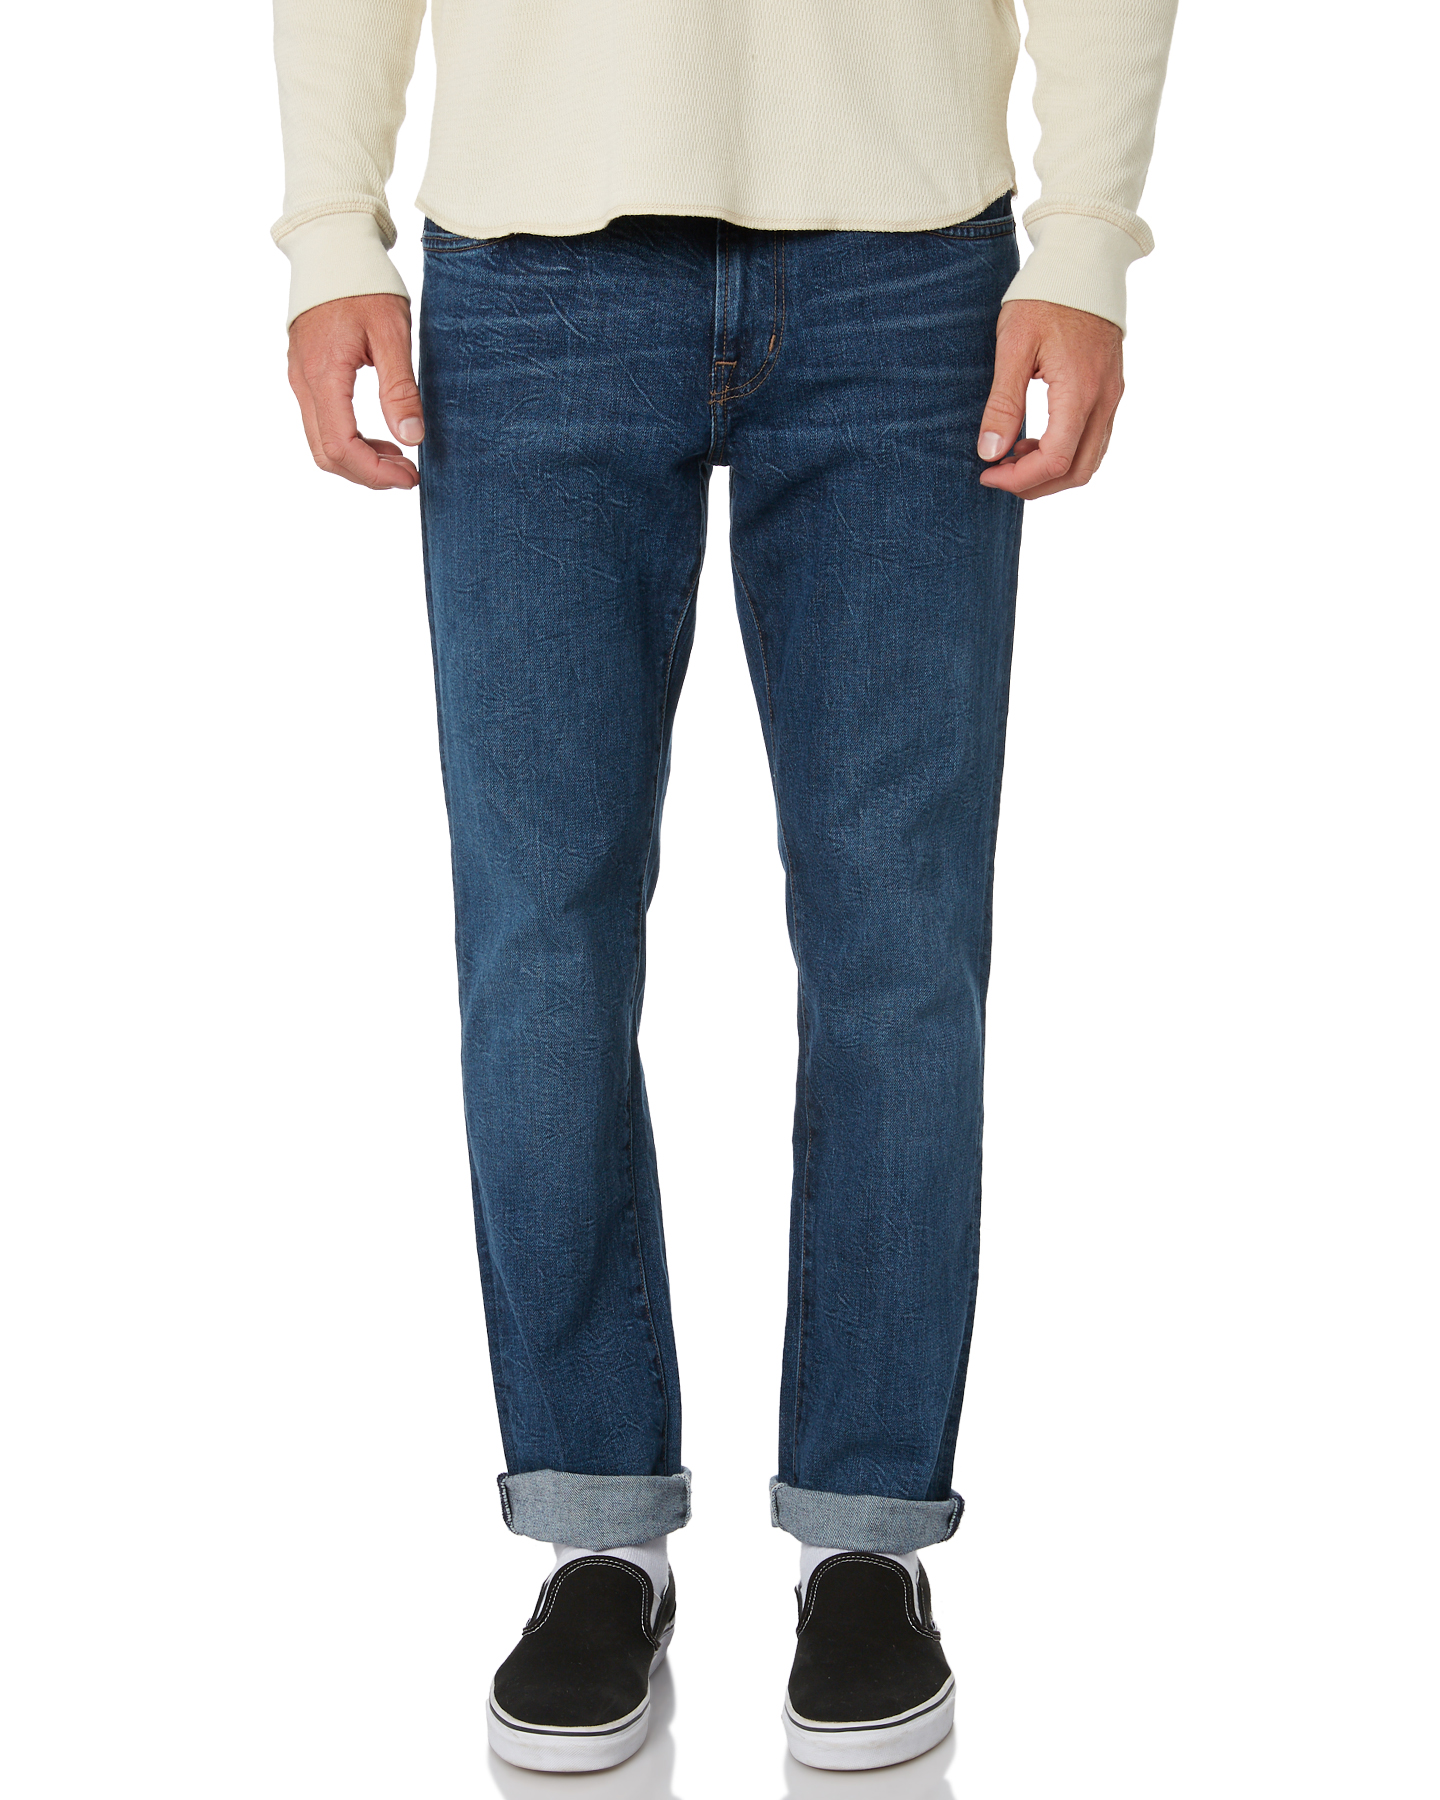 Outerknown Sea Local Straight Fit Mens Jeans - Faded Indigo | SurfStitch